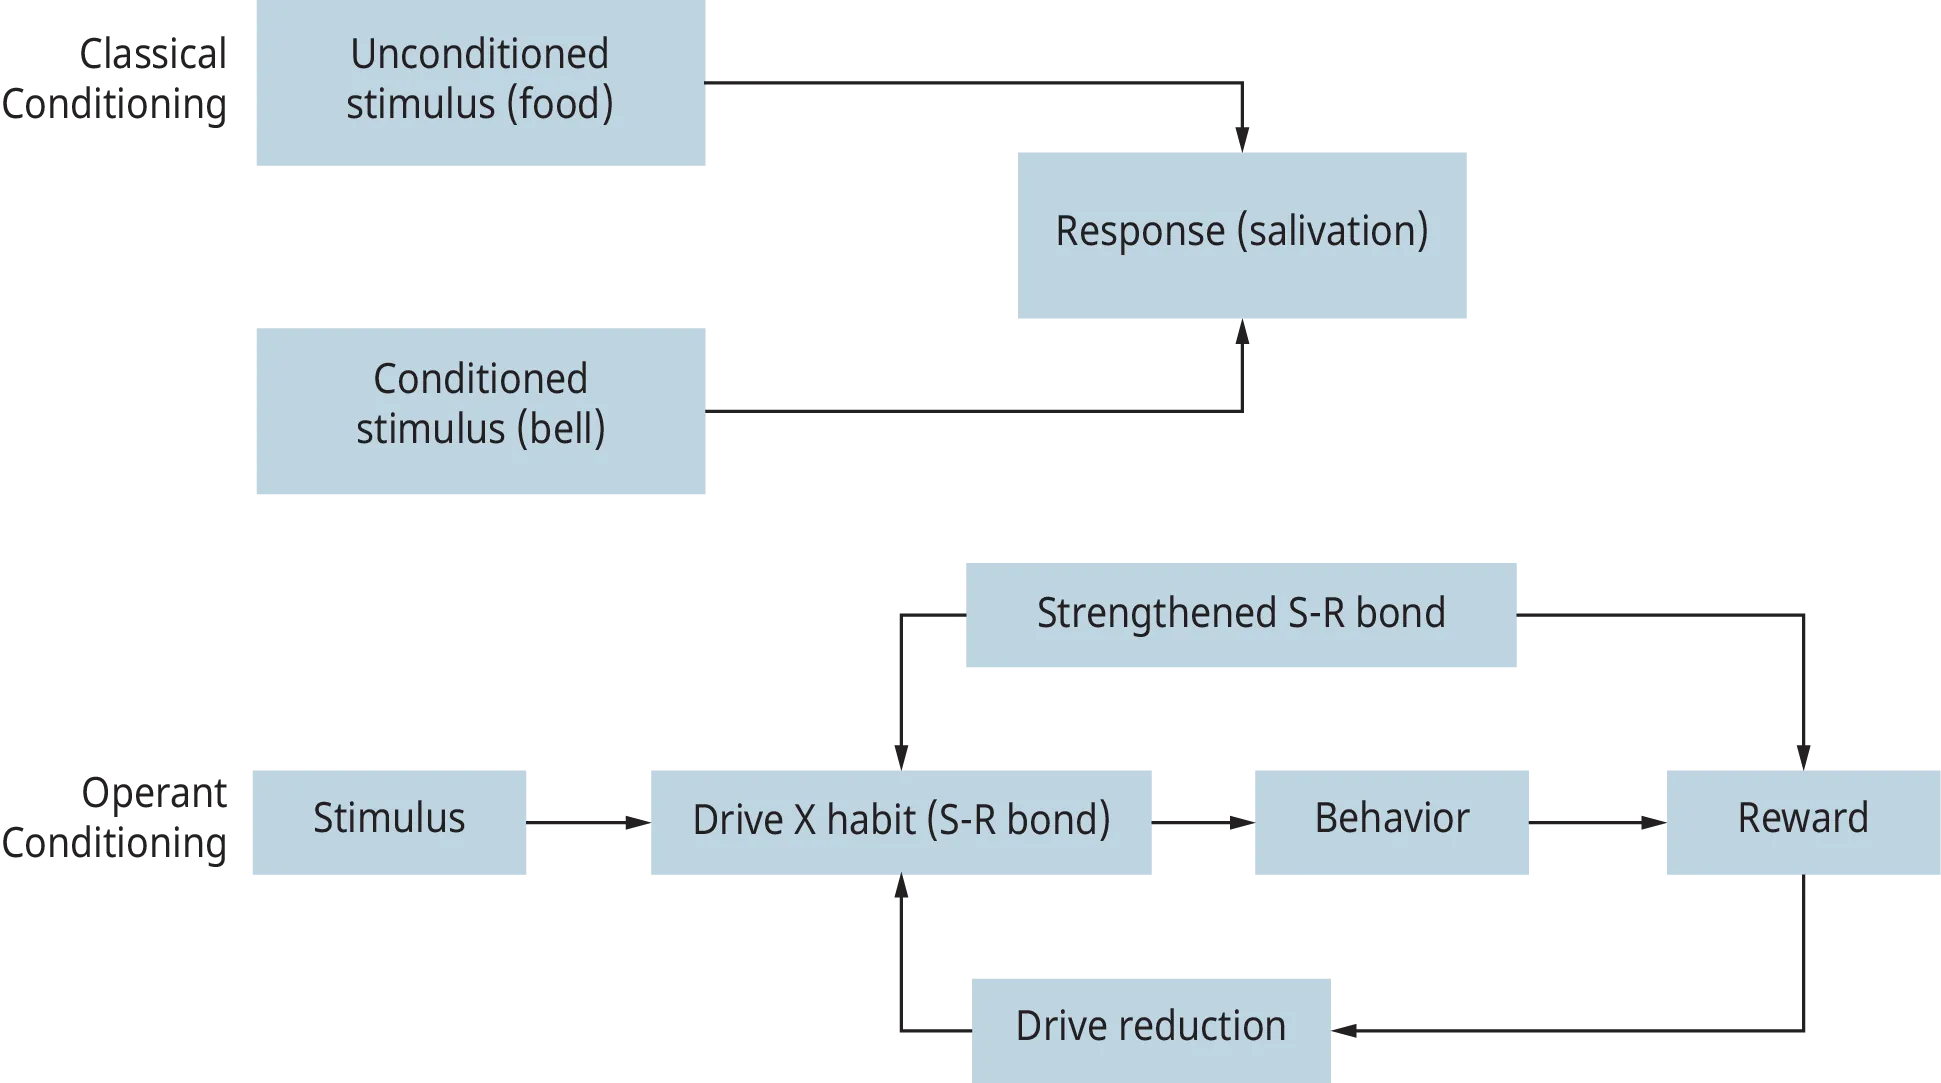 A set of two flowcharts are shown to depict the functioning of “Classical Conditioning” and “Operant Conditioning.”